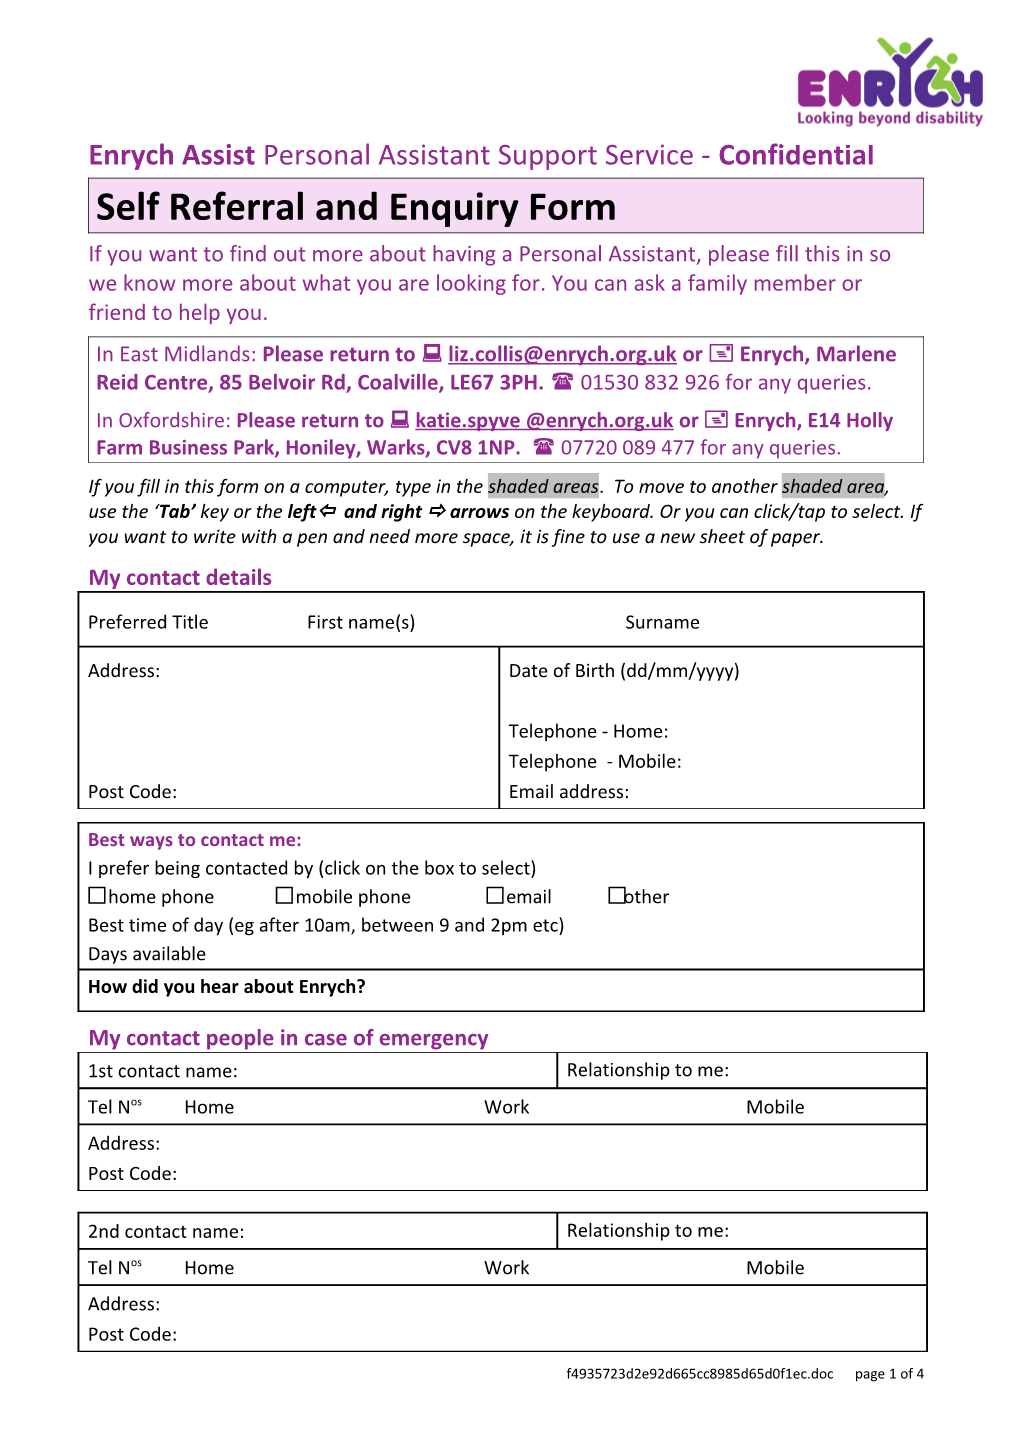 Self Referral and Enquiry Form